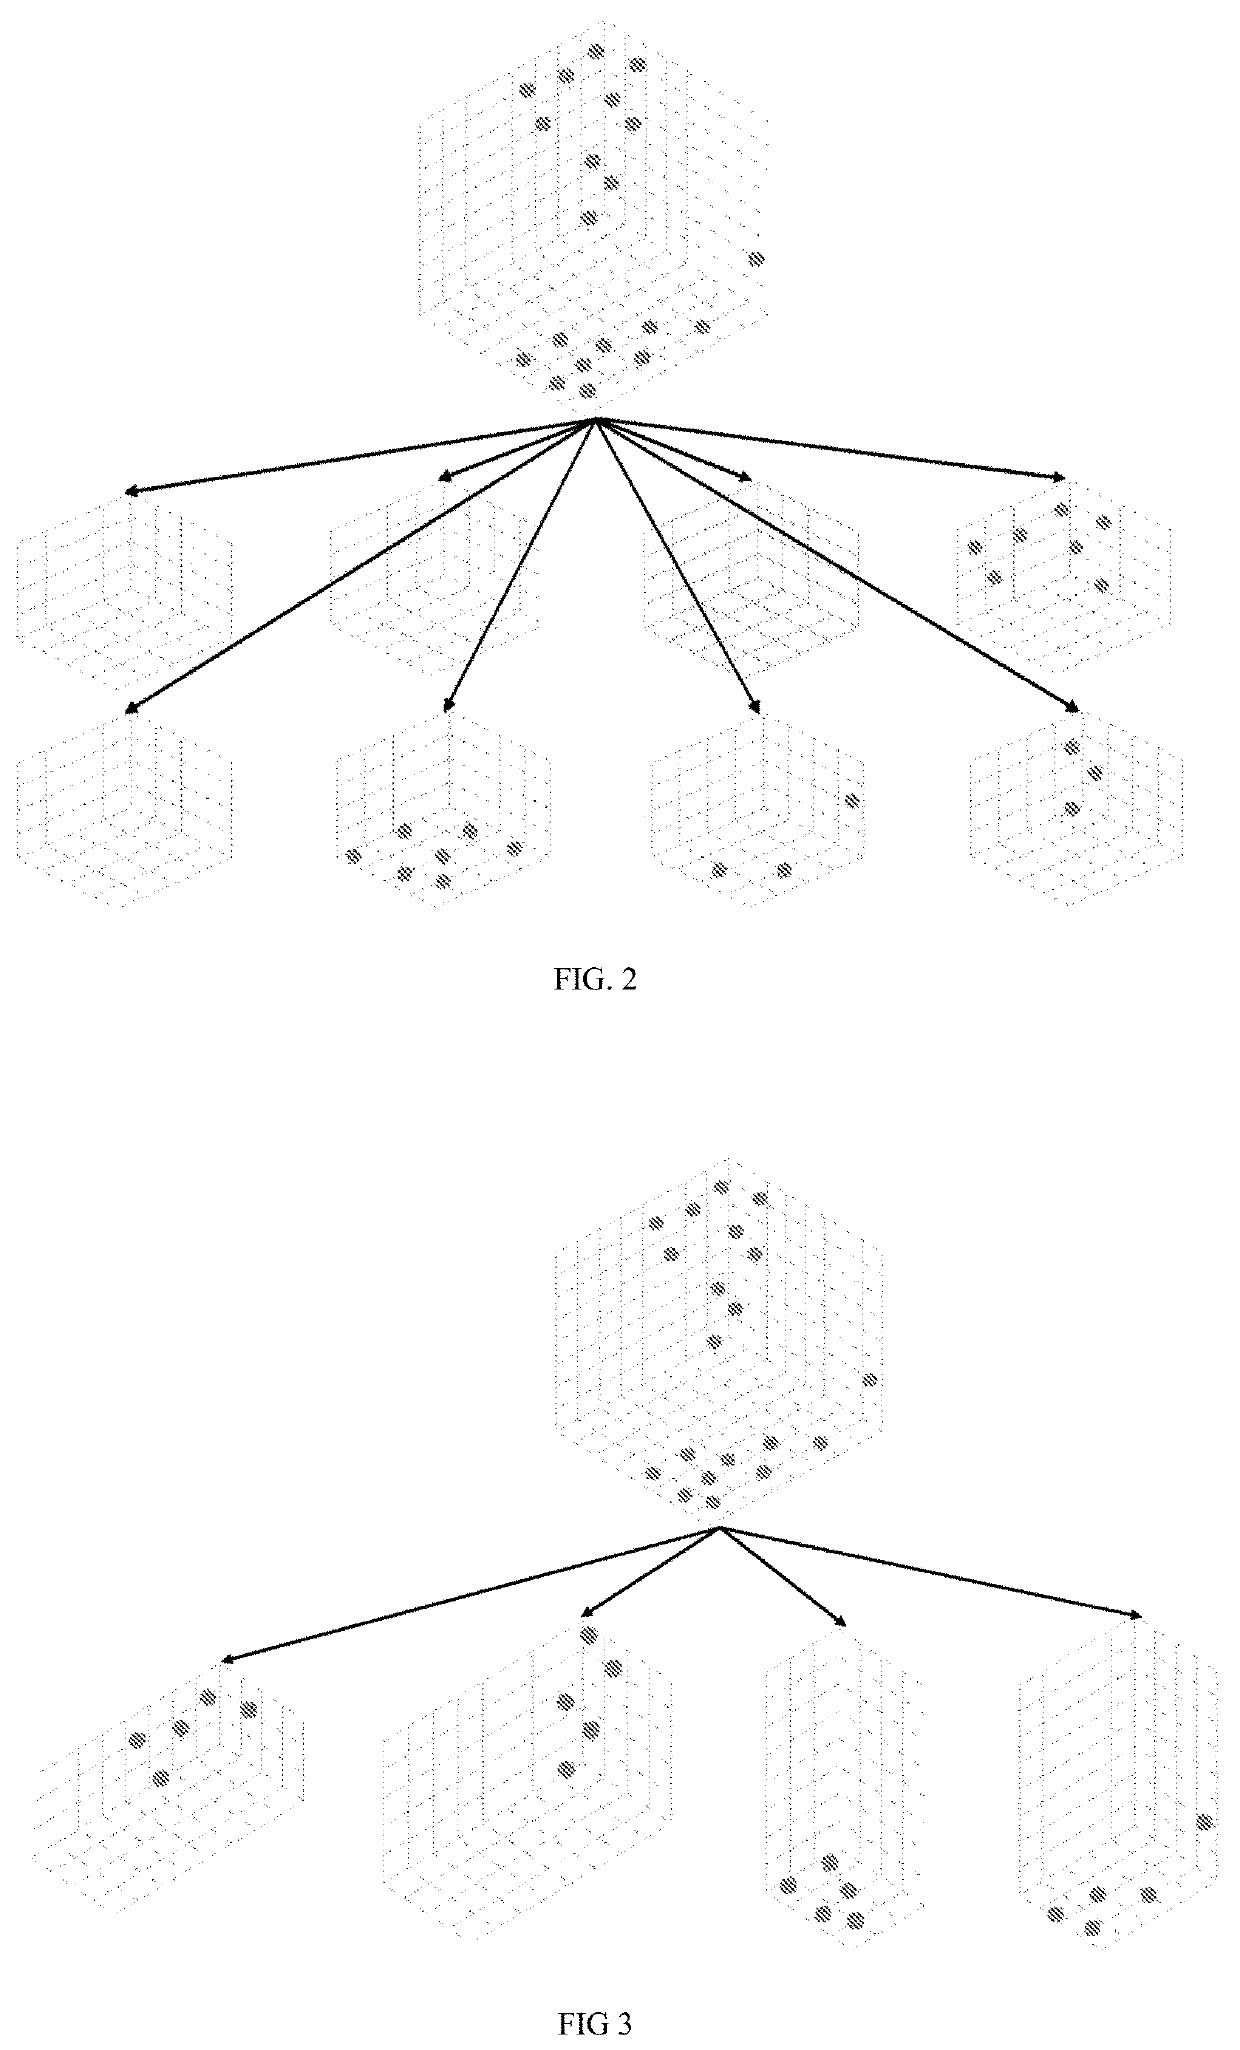 Point cloud attribute compression method based on kd tree and optimized graph transformation